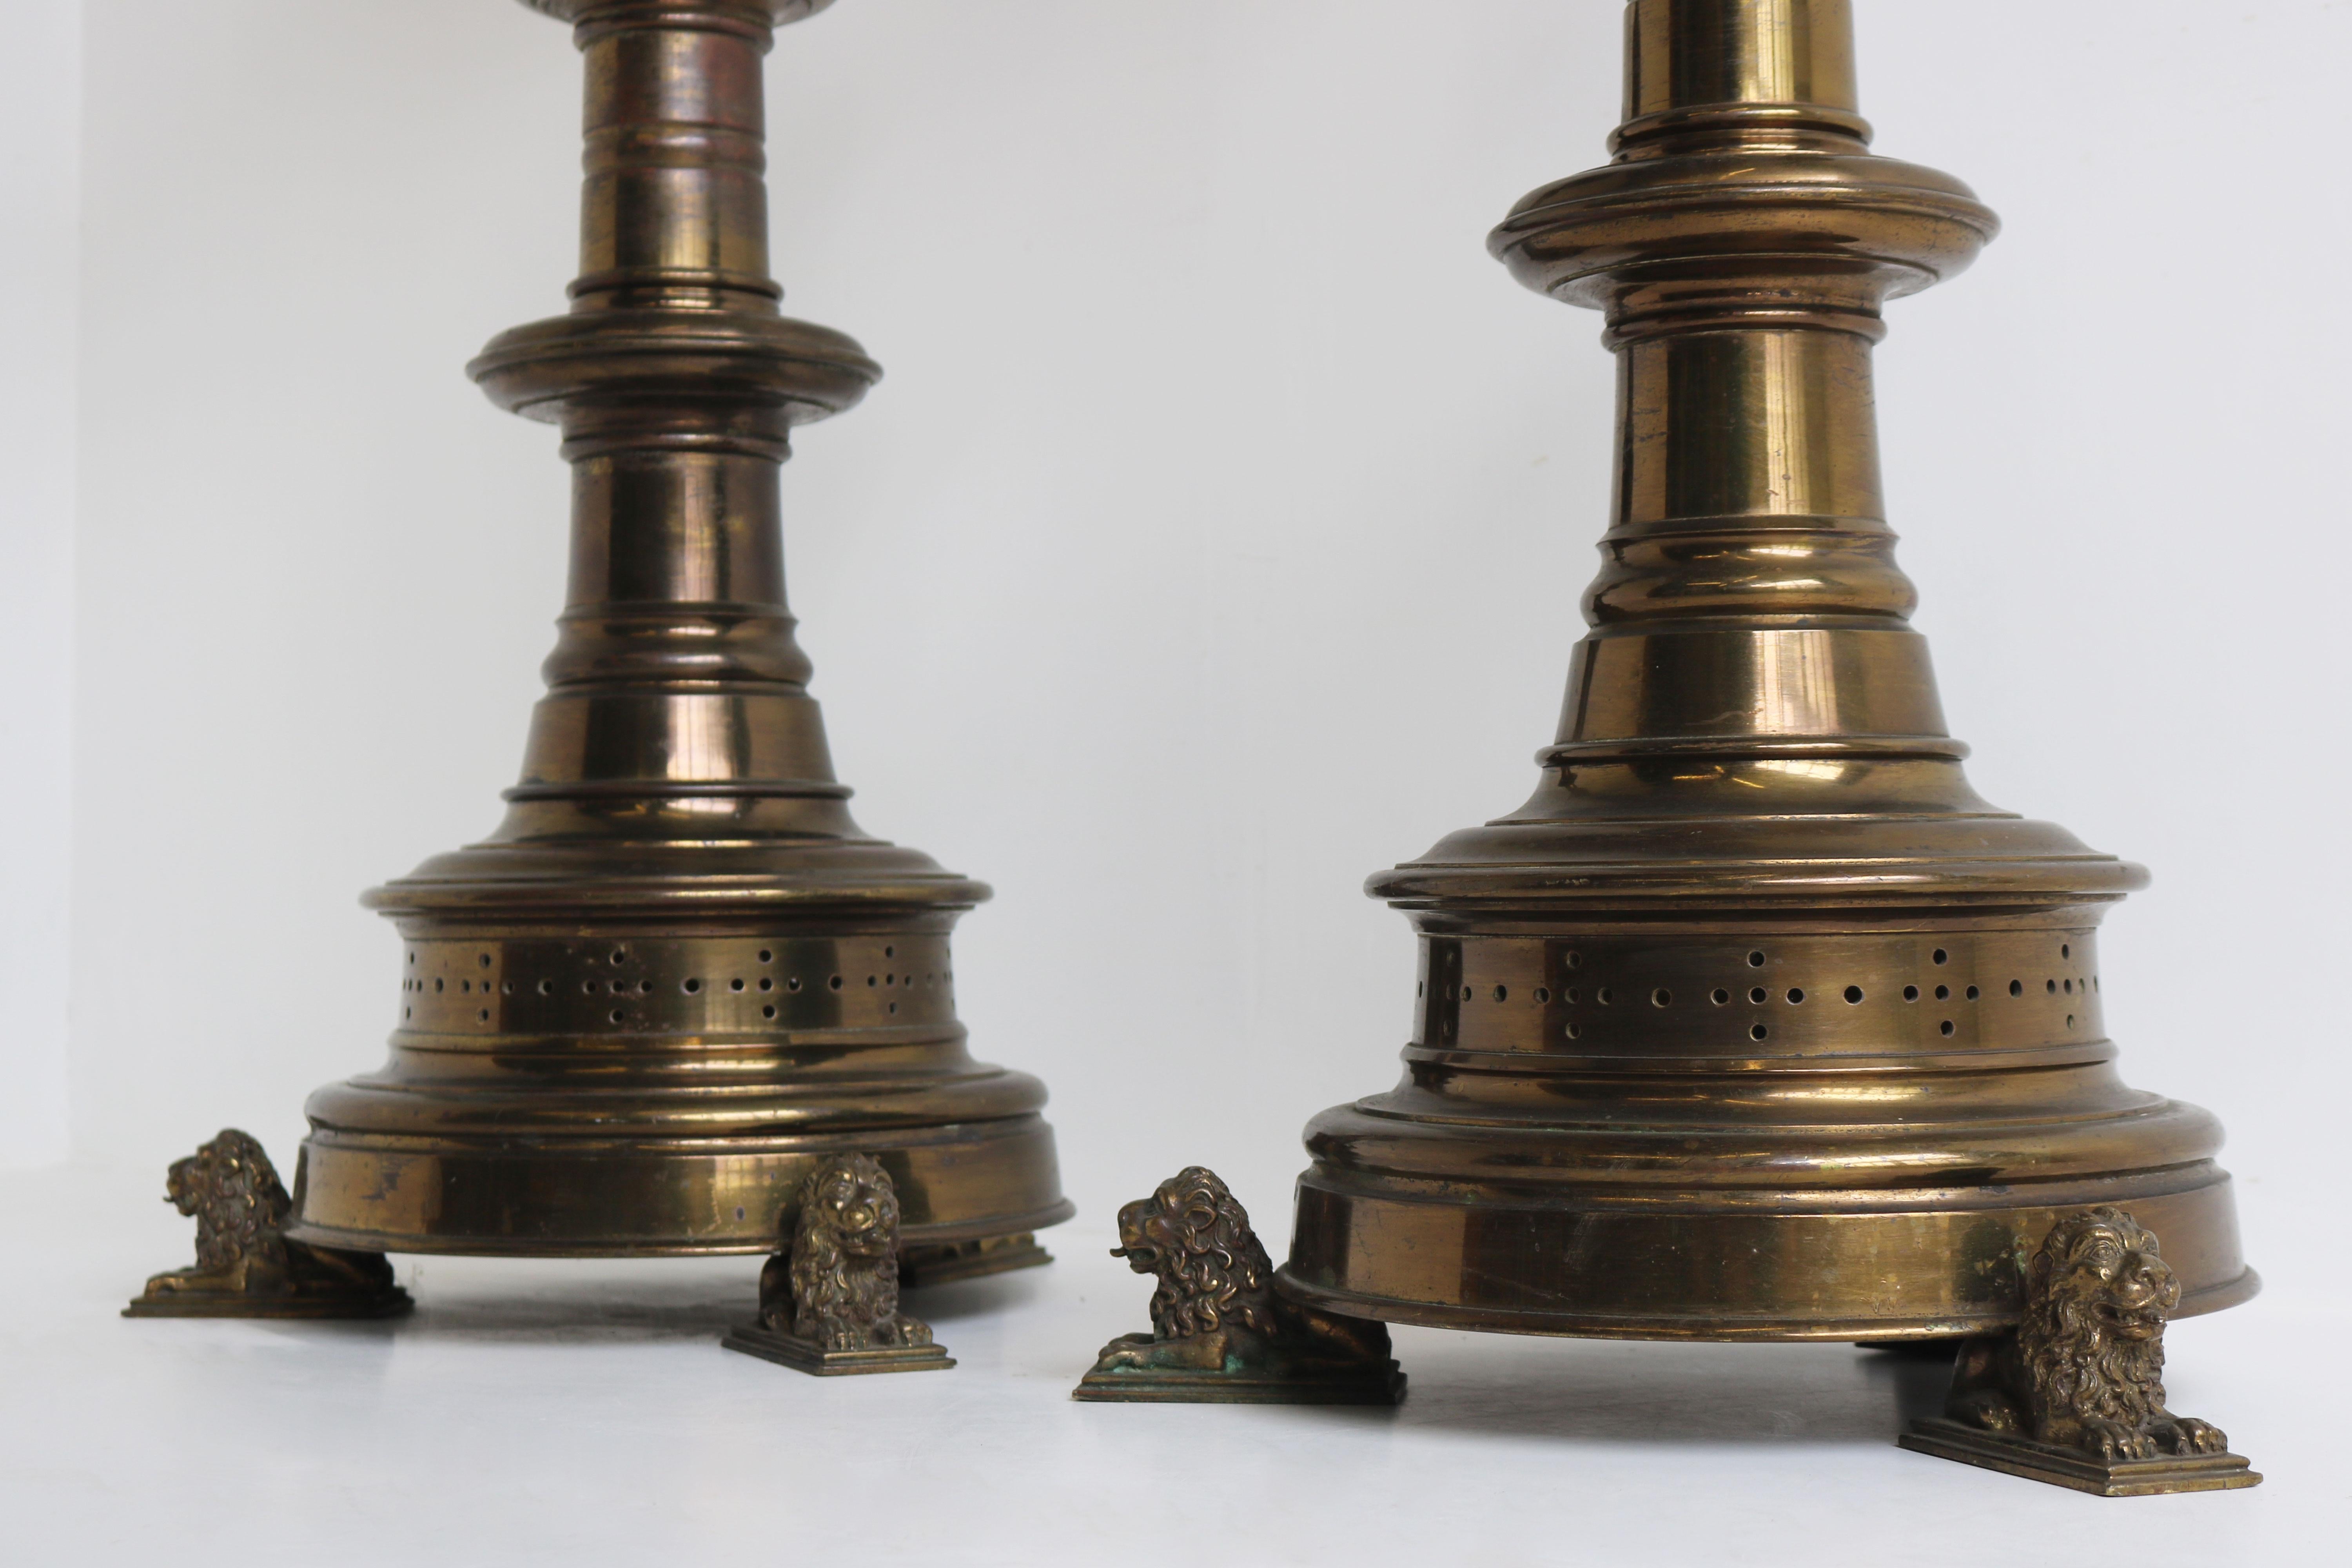 Hand-Crafted Pair of Large Gilt Bronze Gothic Revival Church Candlesticks Candleholders Lions For Sale